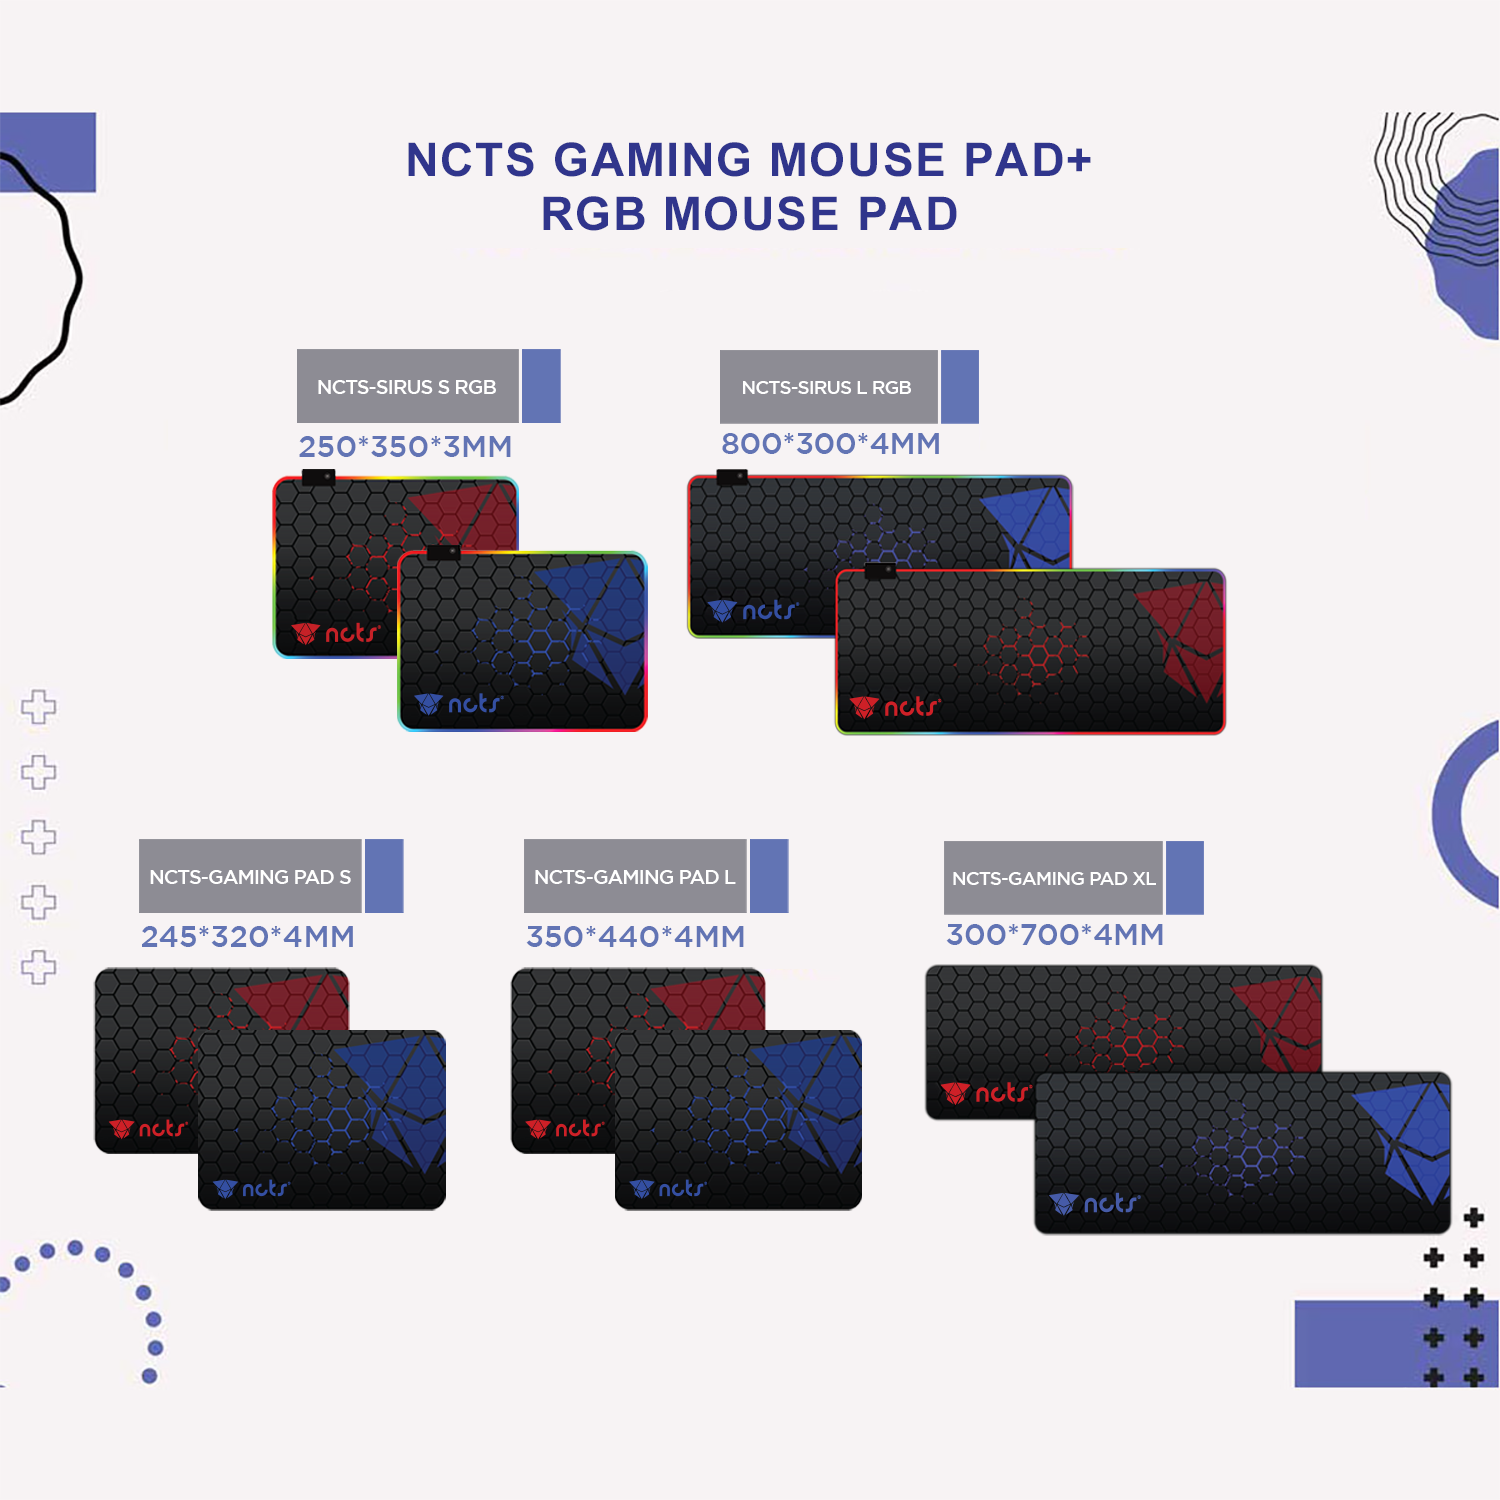 NCTS GAMING MOUSE PAD